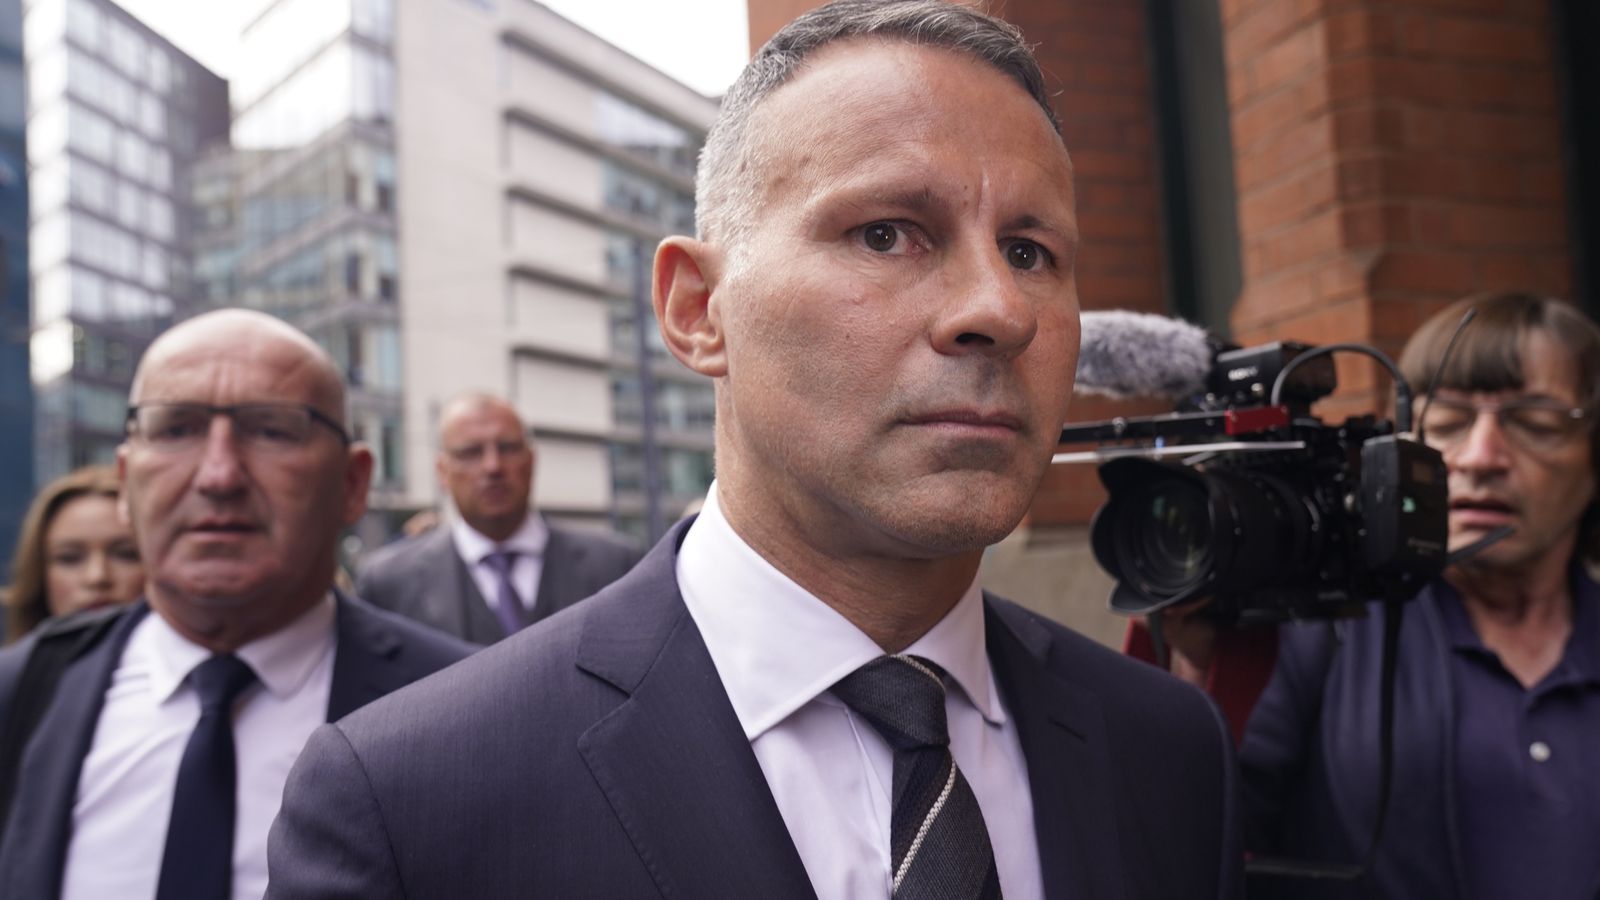 Ryan Giggs headbutted woman after she confronted him about cheating, court told